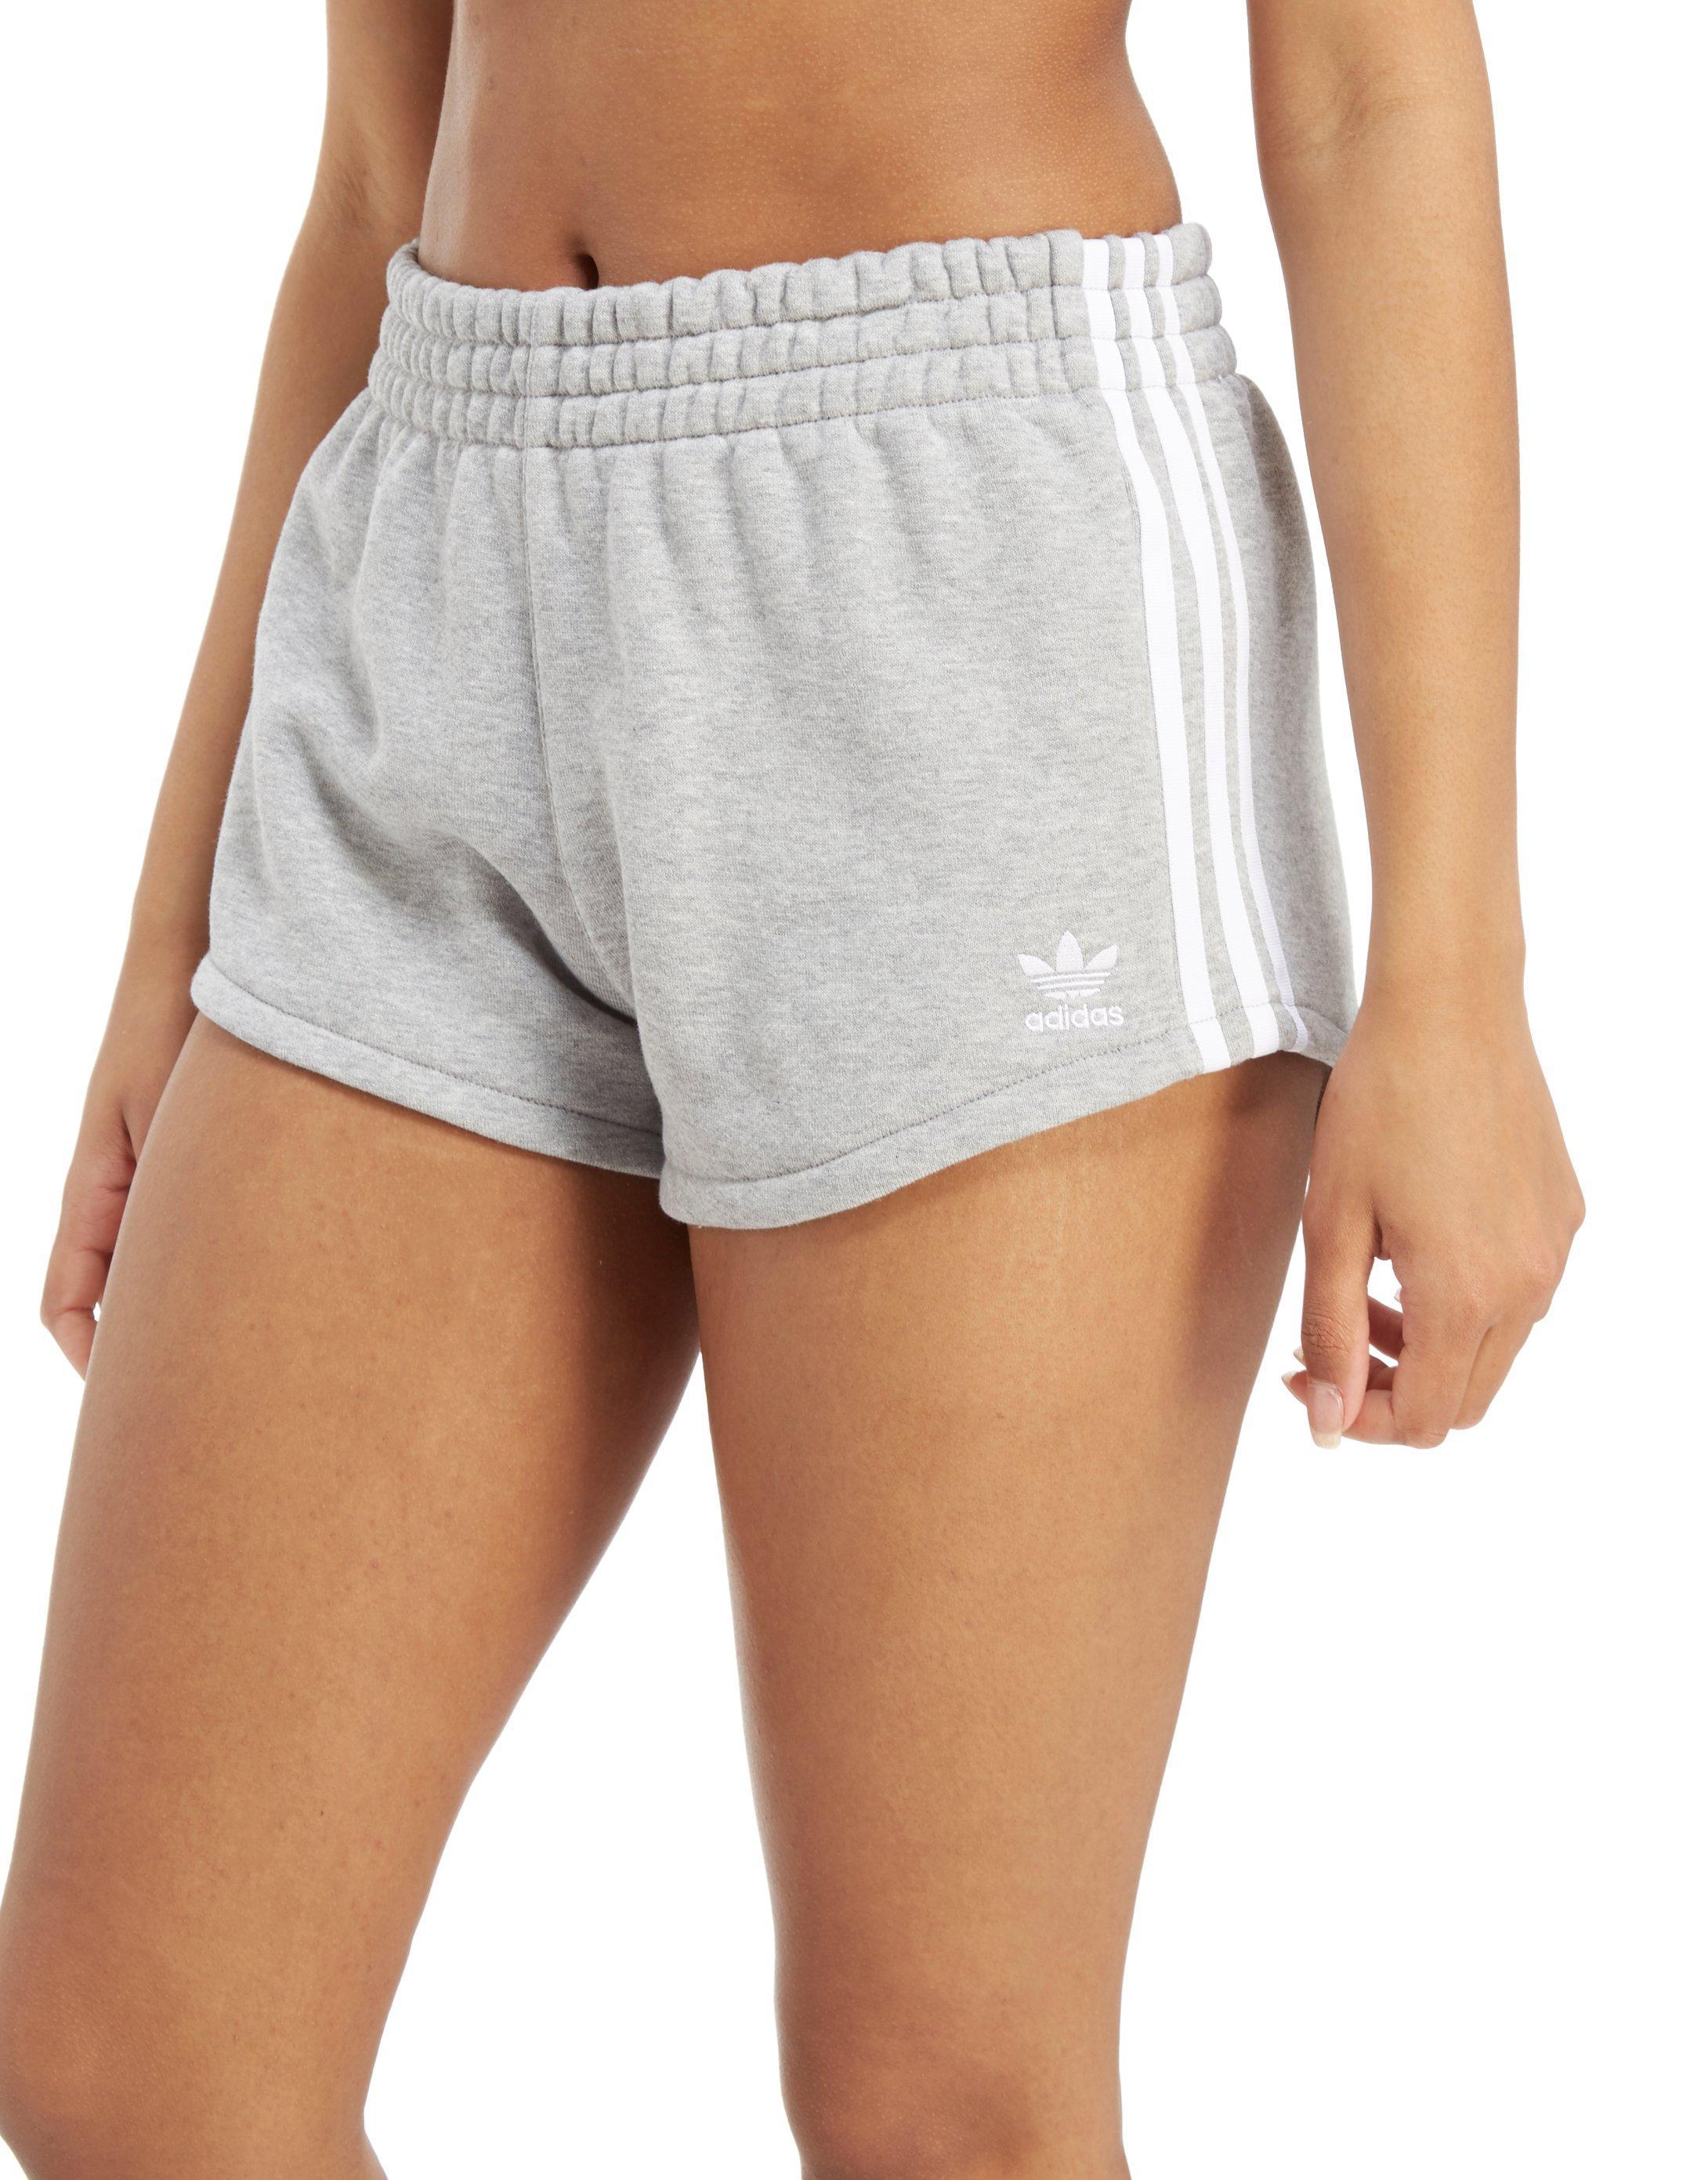 adidas Originals 3-stripes French Terry Shorts in Gray - Lyst